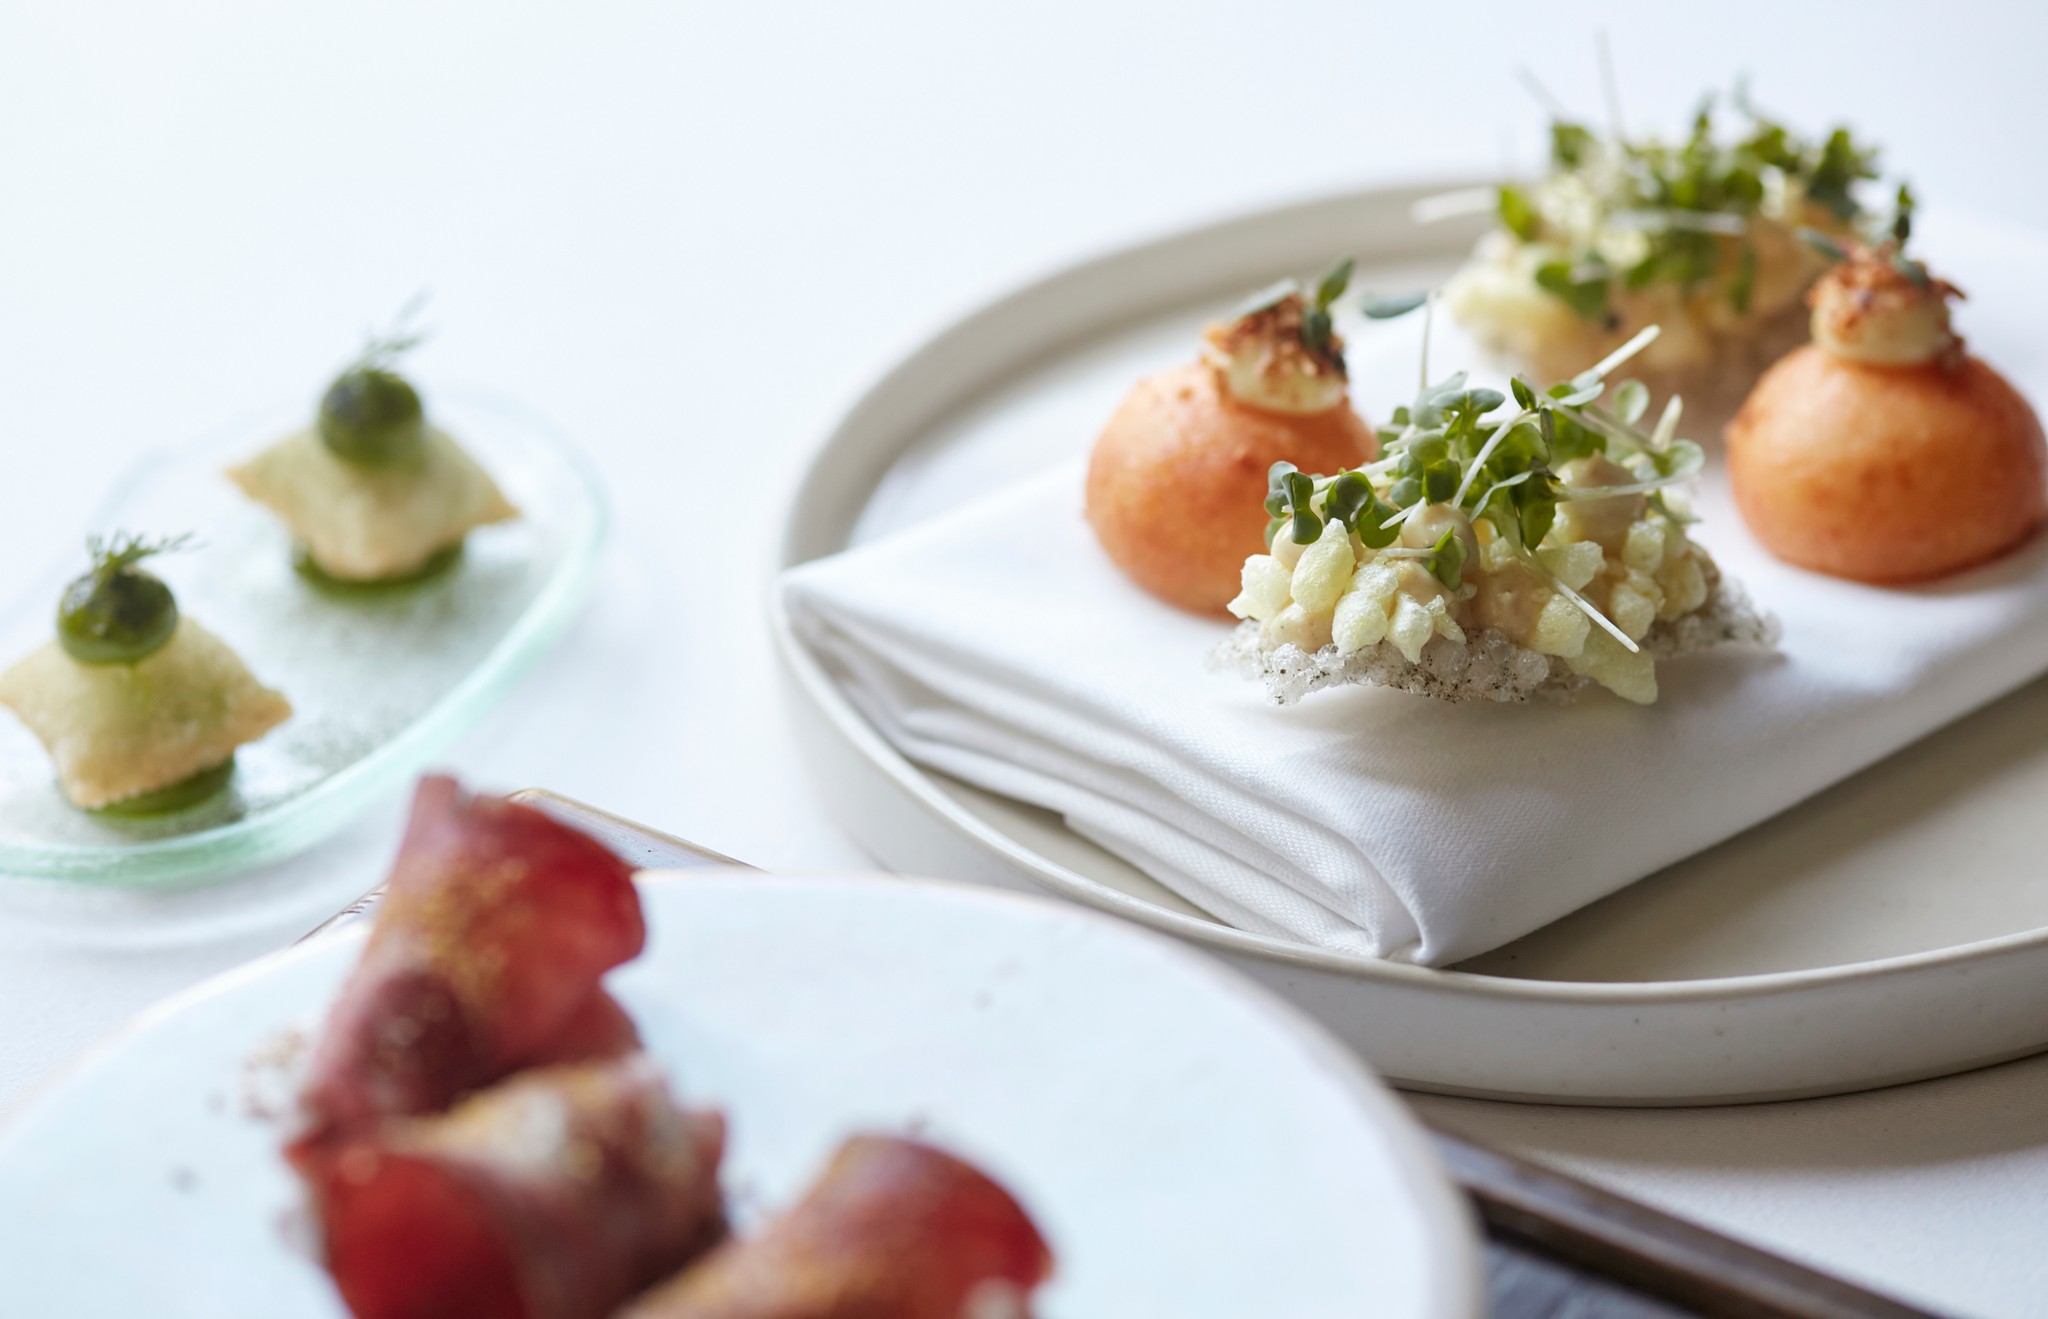 Canapes at Marcus Belgravia, Michelin-starred restaurant in London